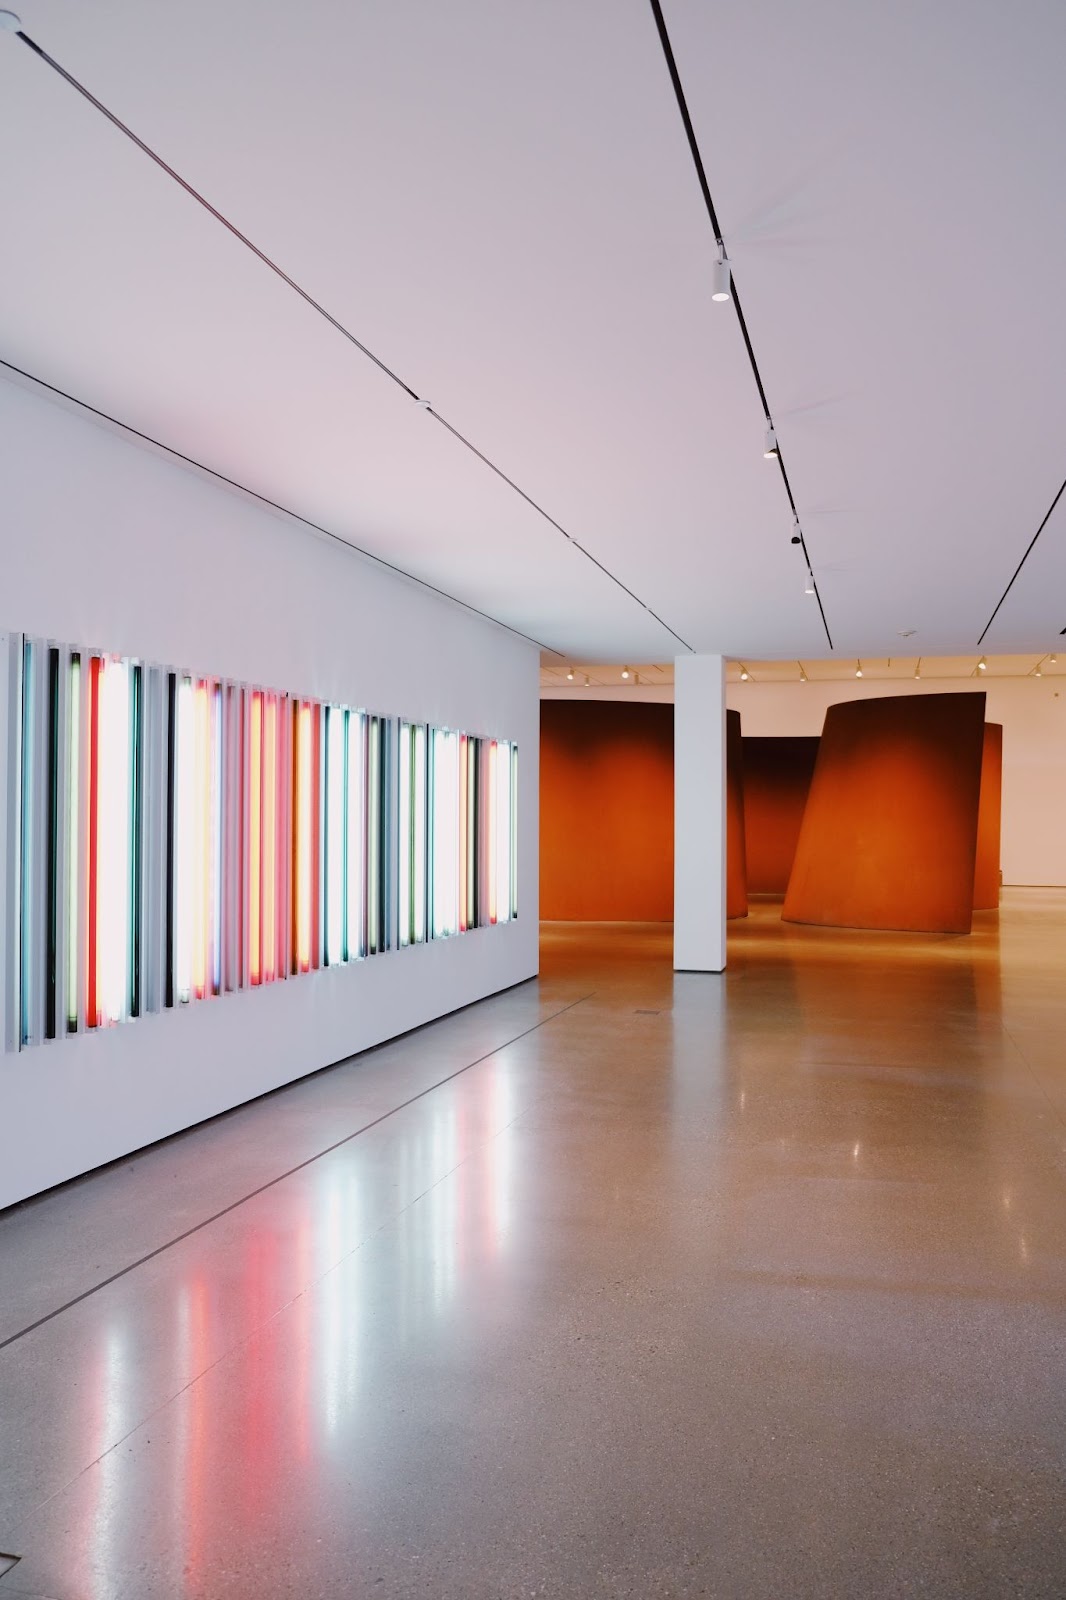 A museum exhibition of minimalism art